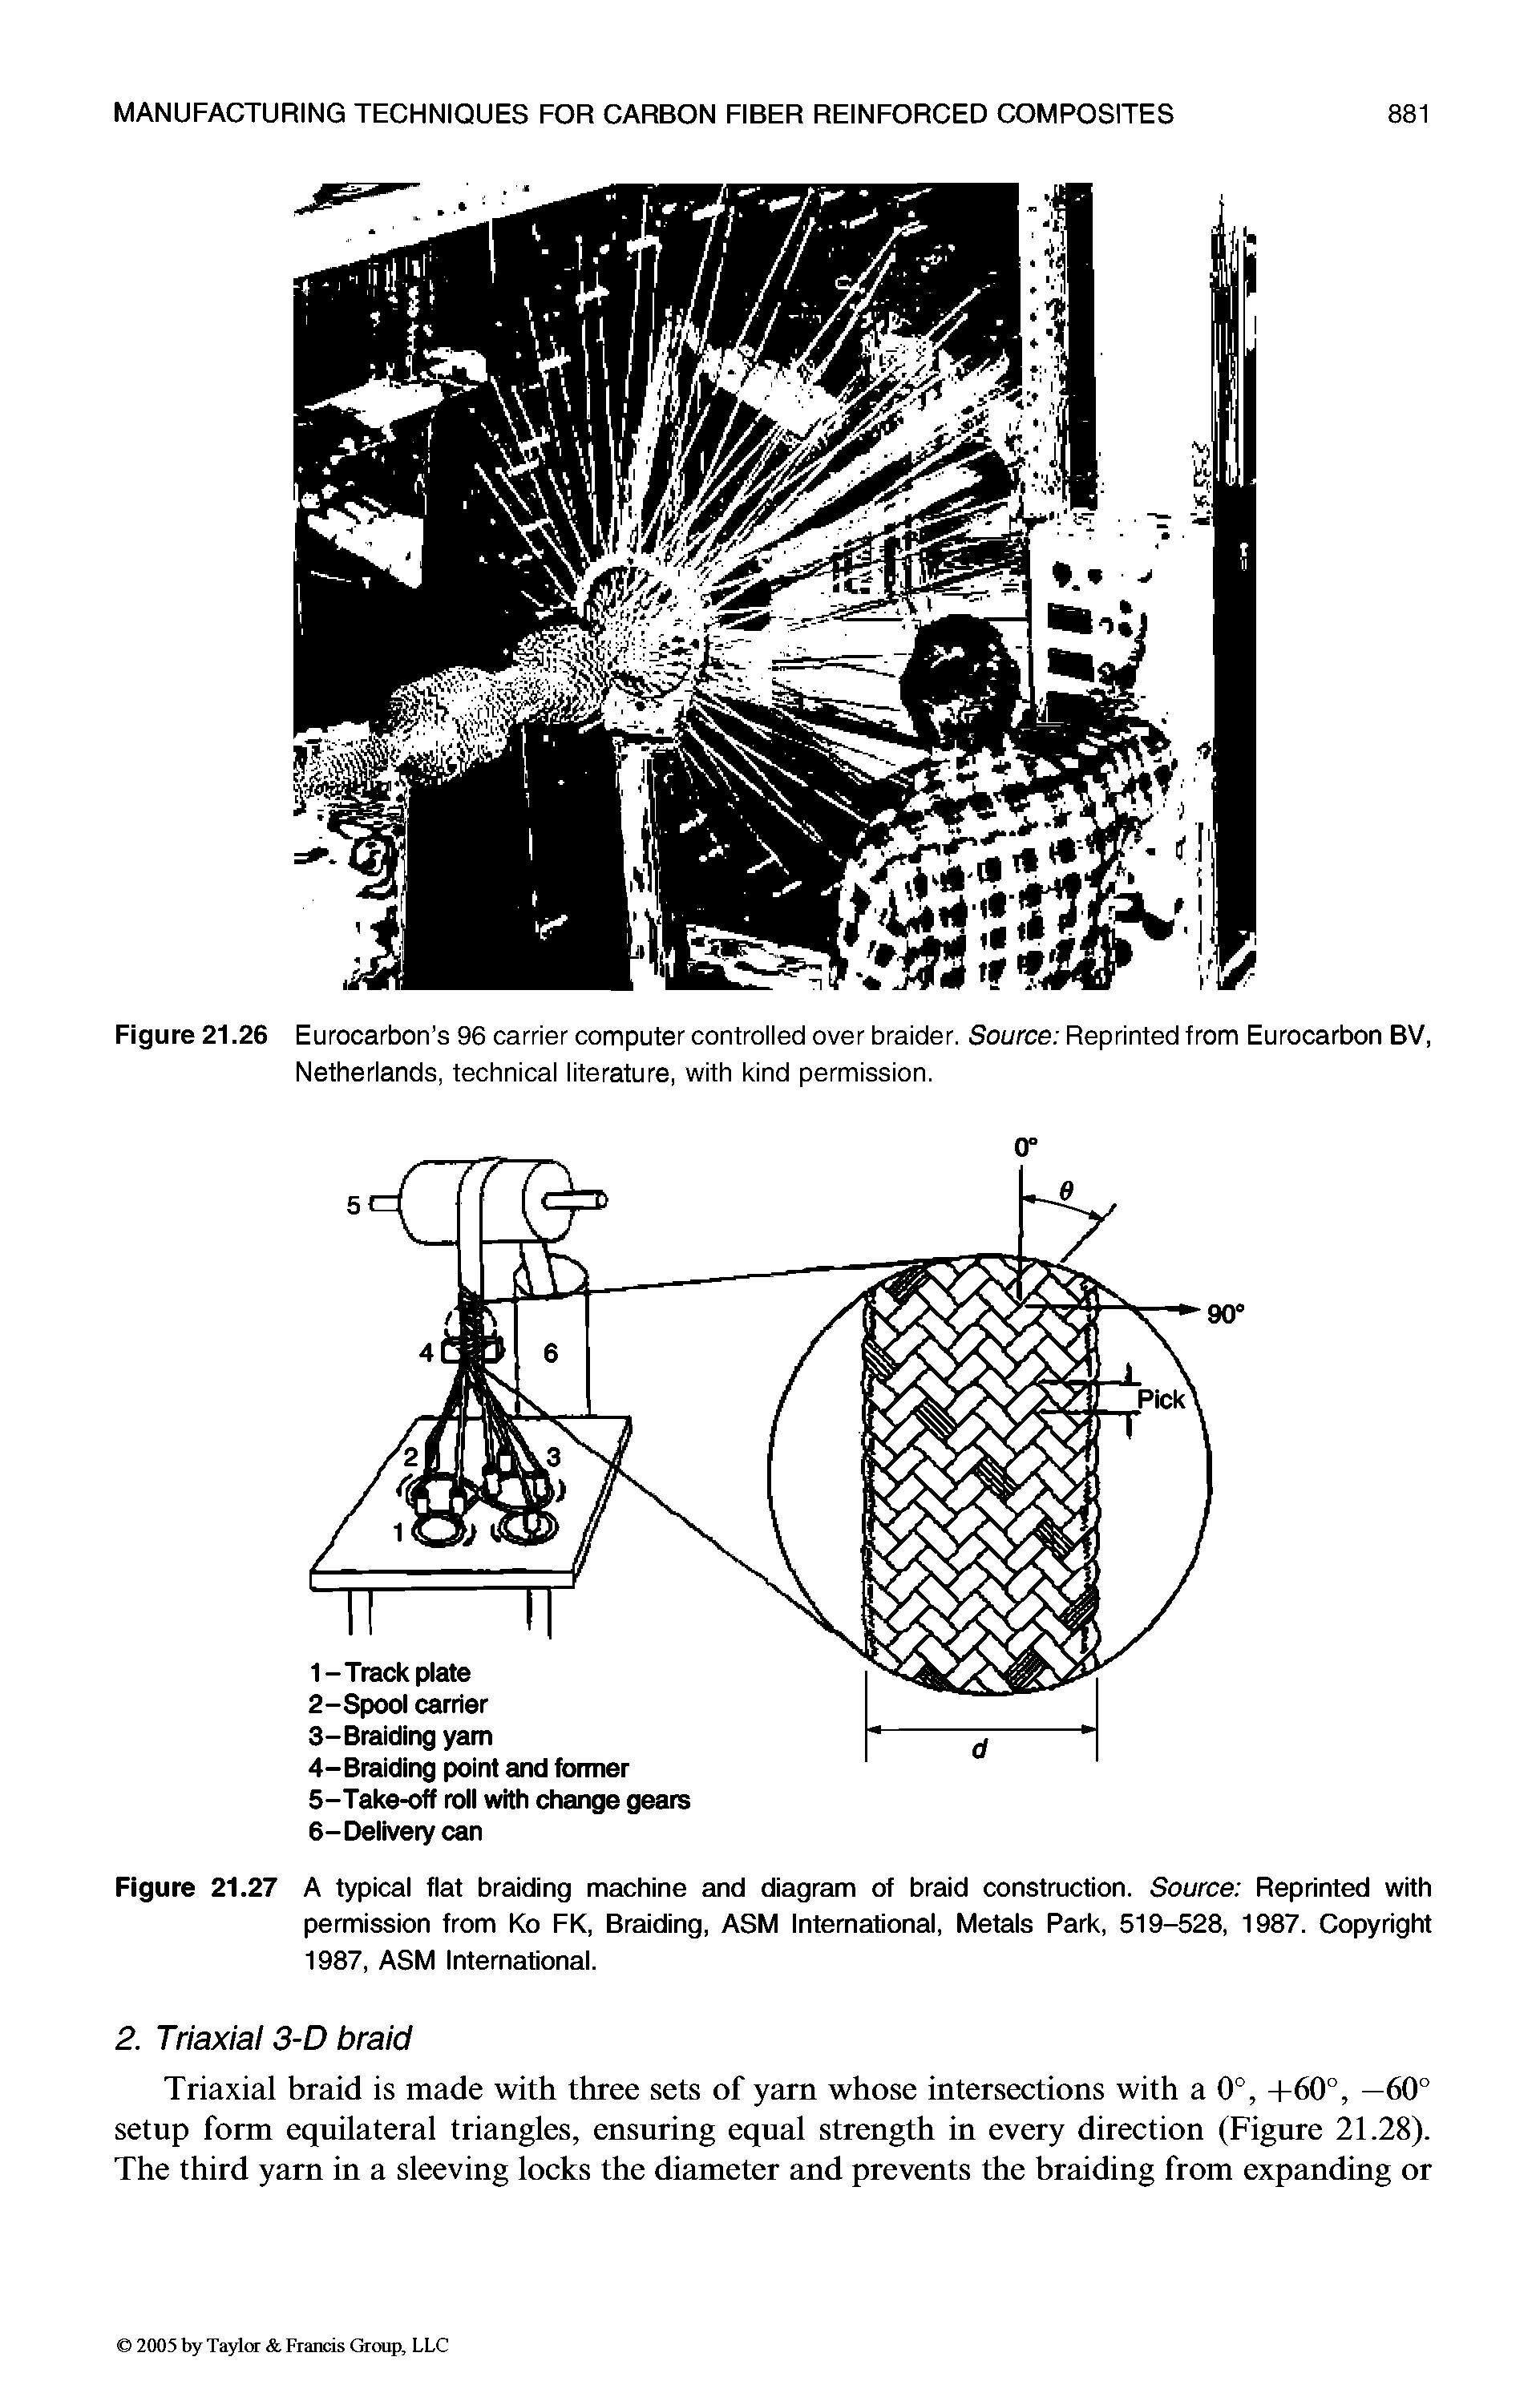 Figure 21.27 A typical flat braiding machine and diagram of braid construction. Source Reprinted with permission from Ko FK, Braiding, ASM International, Metals Park, 519-528, 1987. Copyright 1987, ASM International.